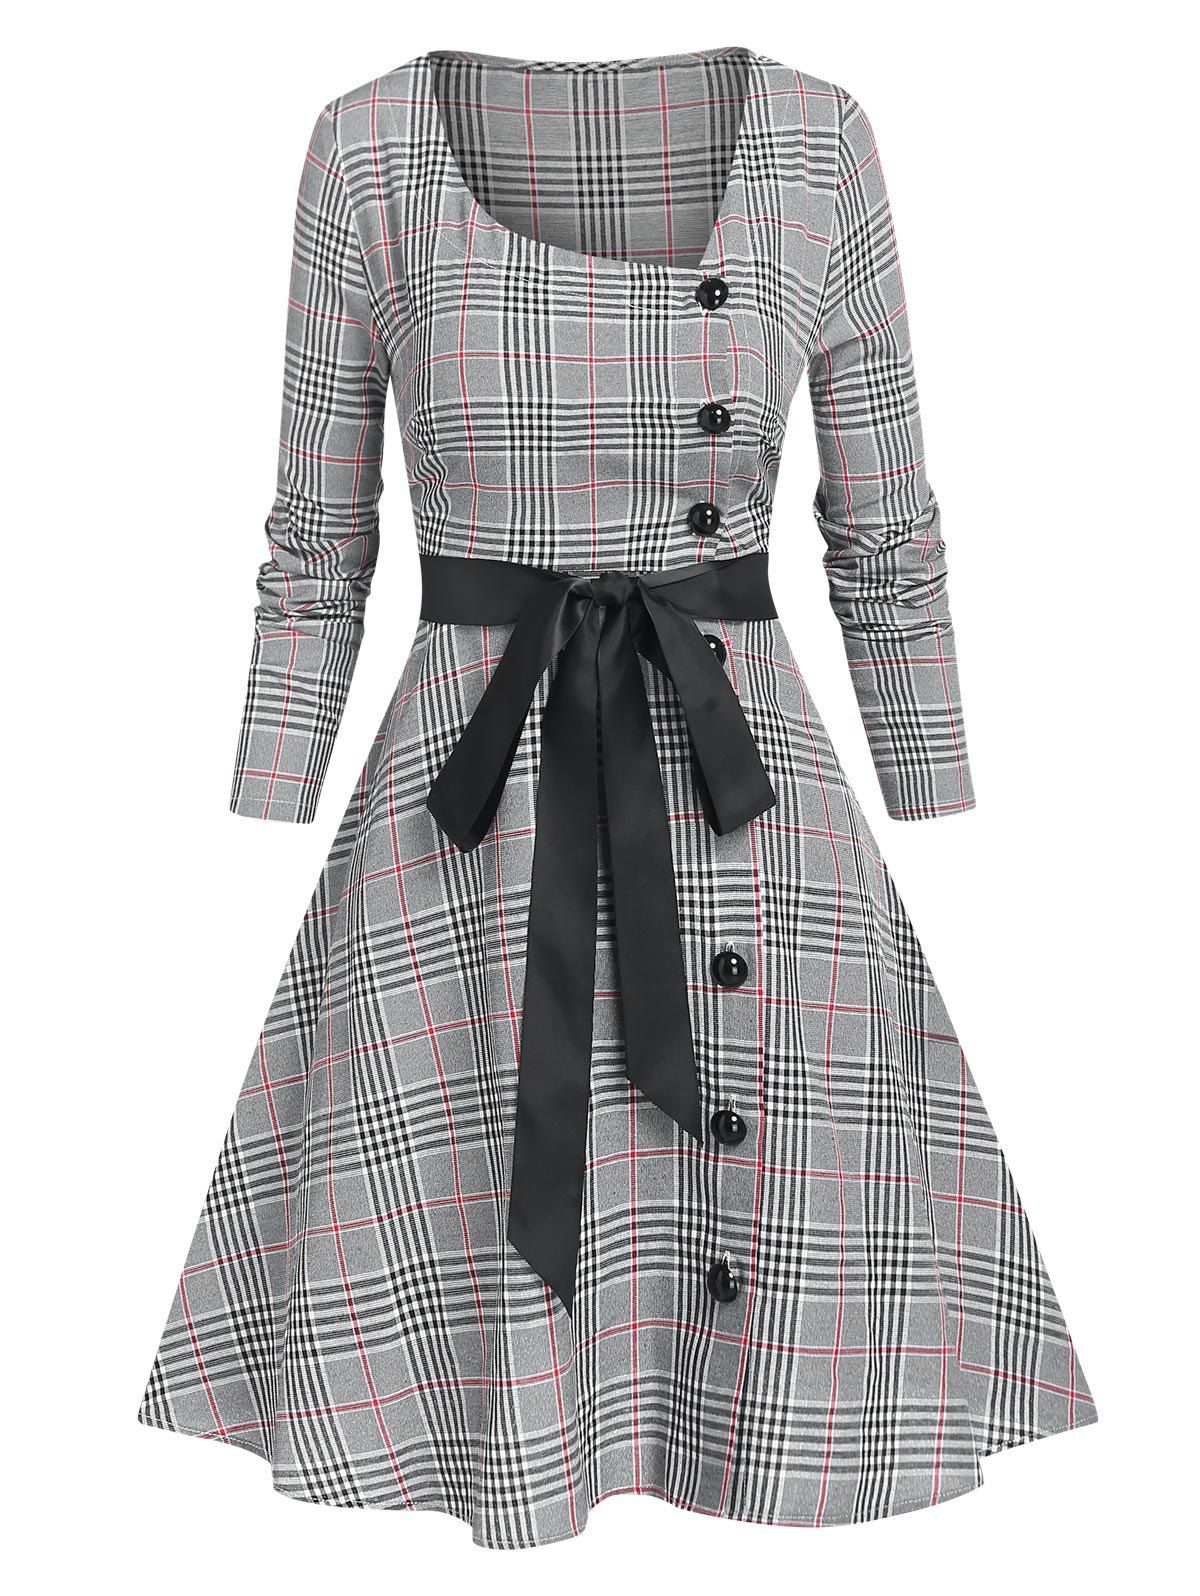 Skew Neck Plaid Fit and Flare Dress - GRAY L